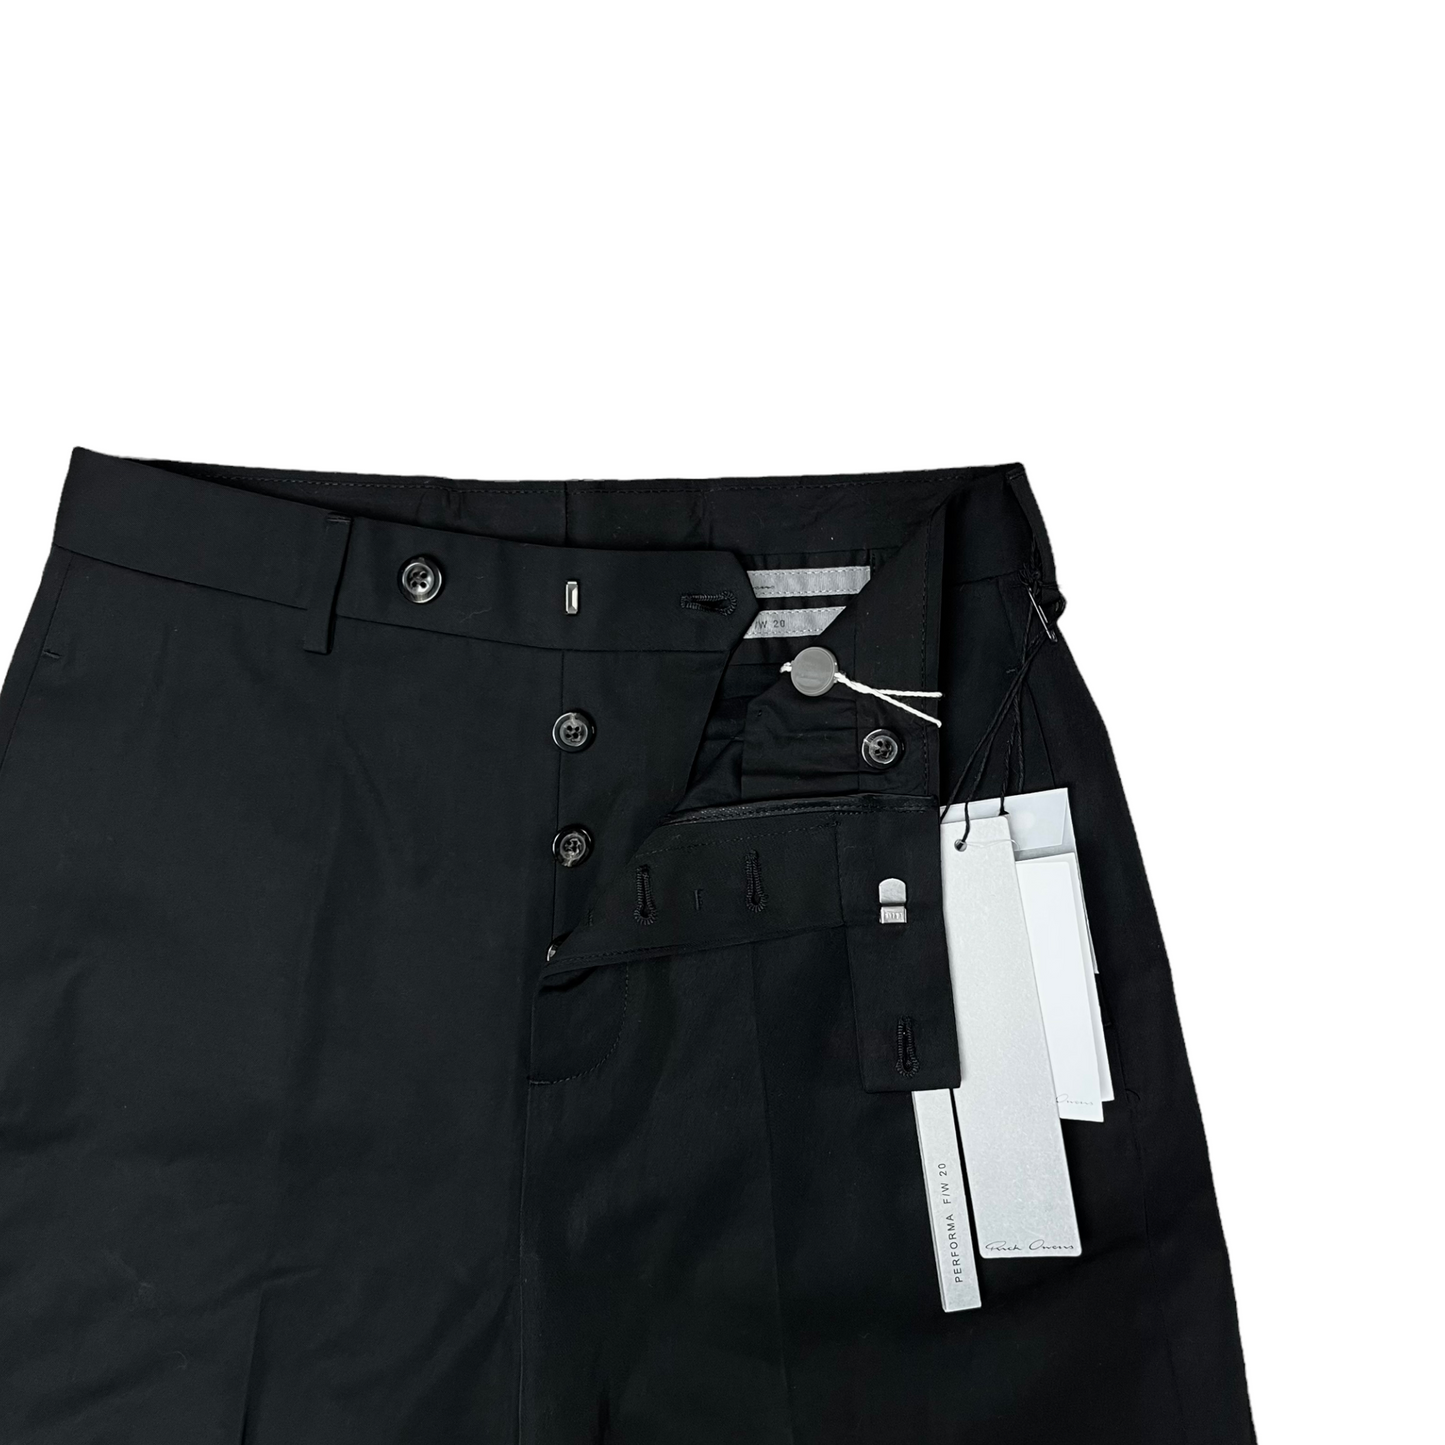 Rick Owens Wide Walrus Trousers - AW20